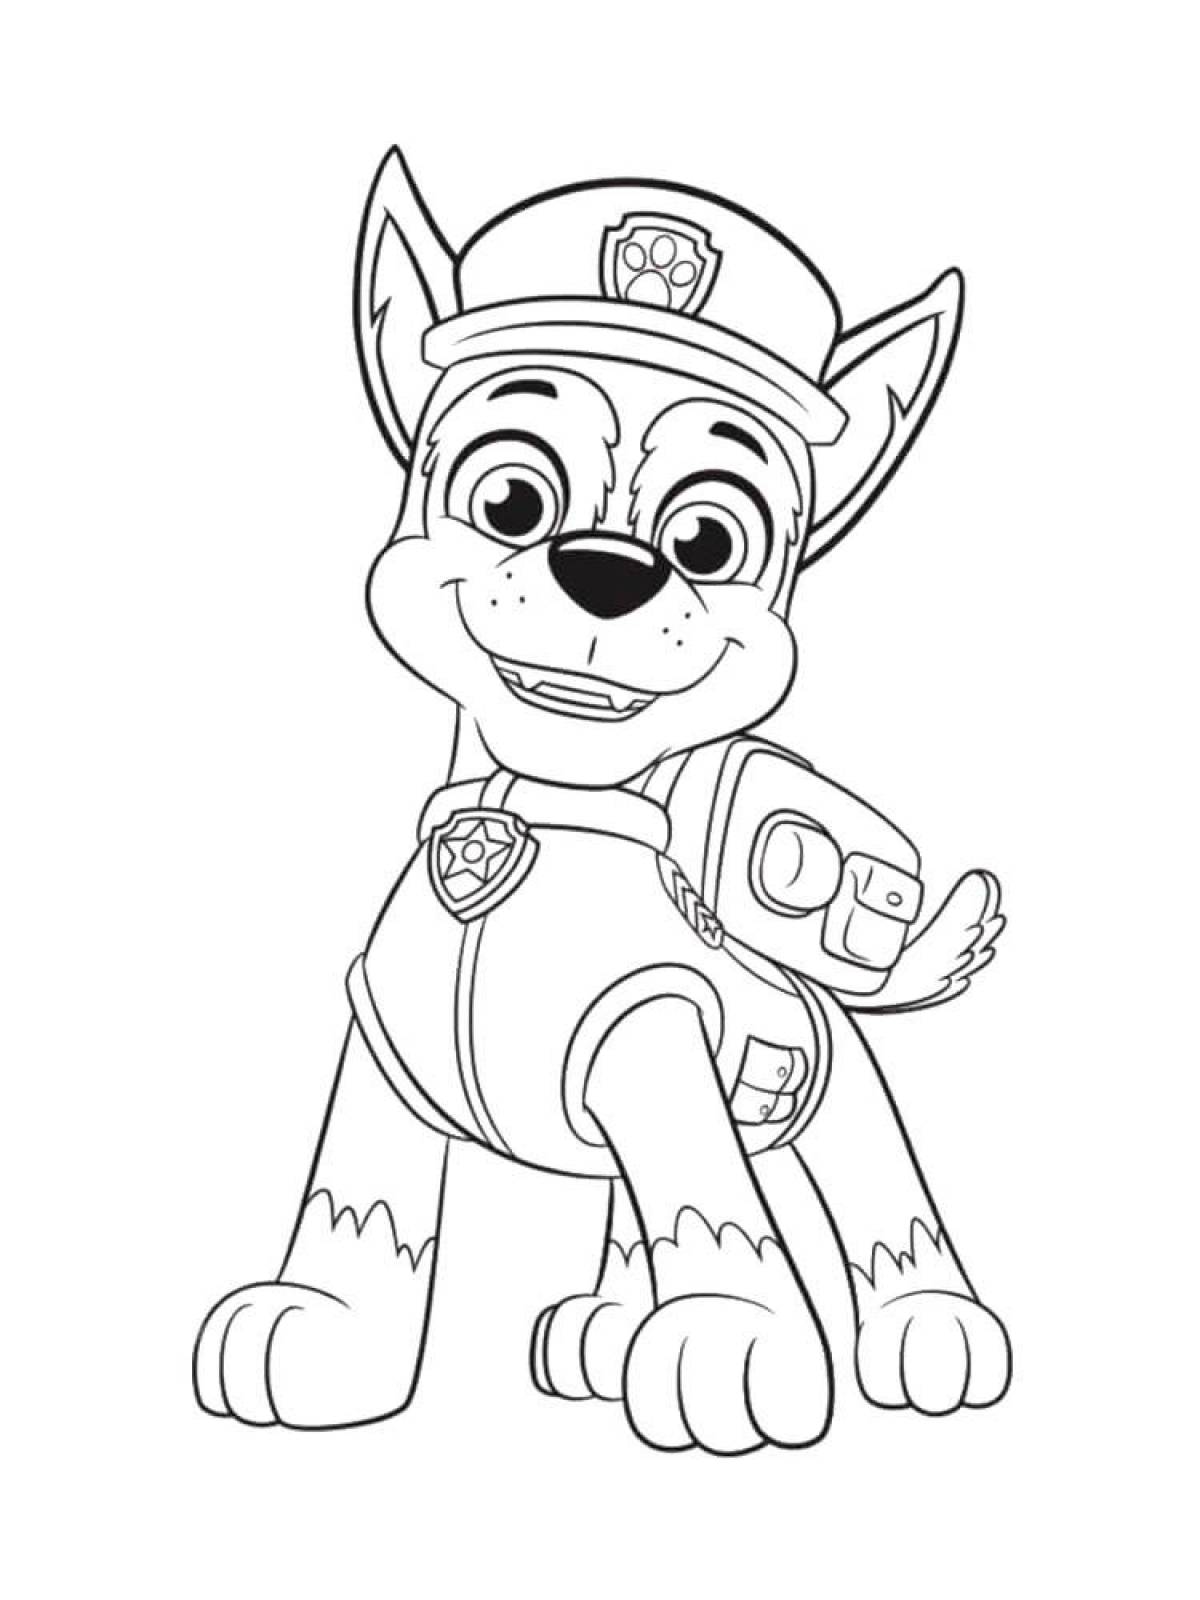 Fantastic Paw Patrol coloring book for kids 6-7 years old